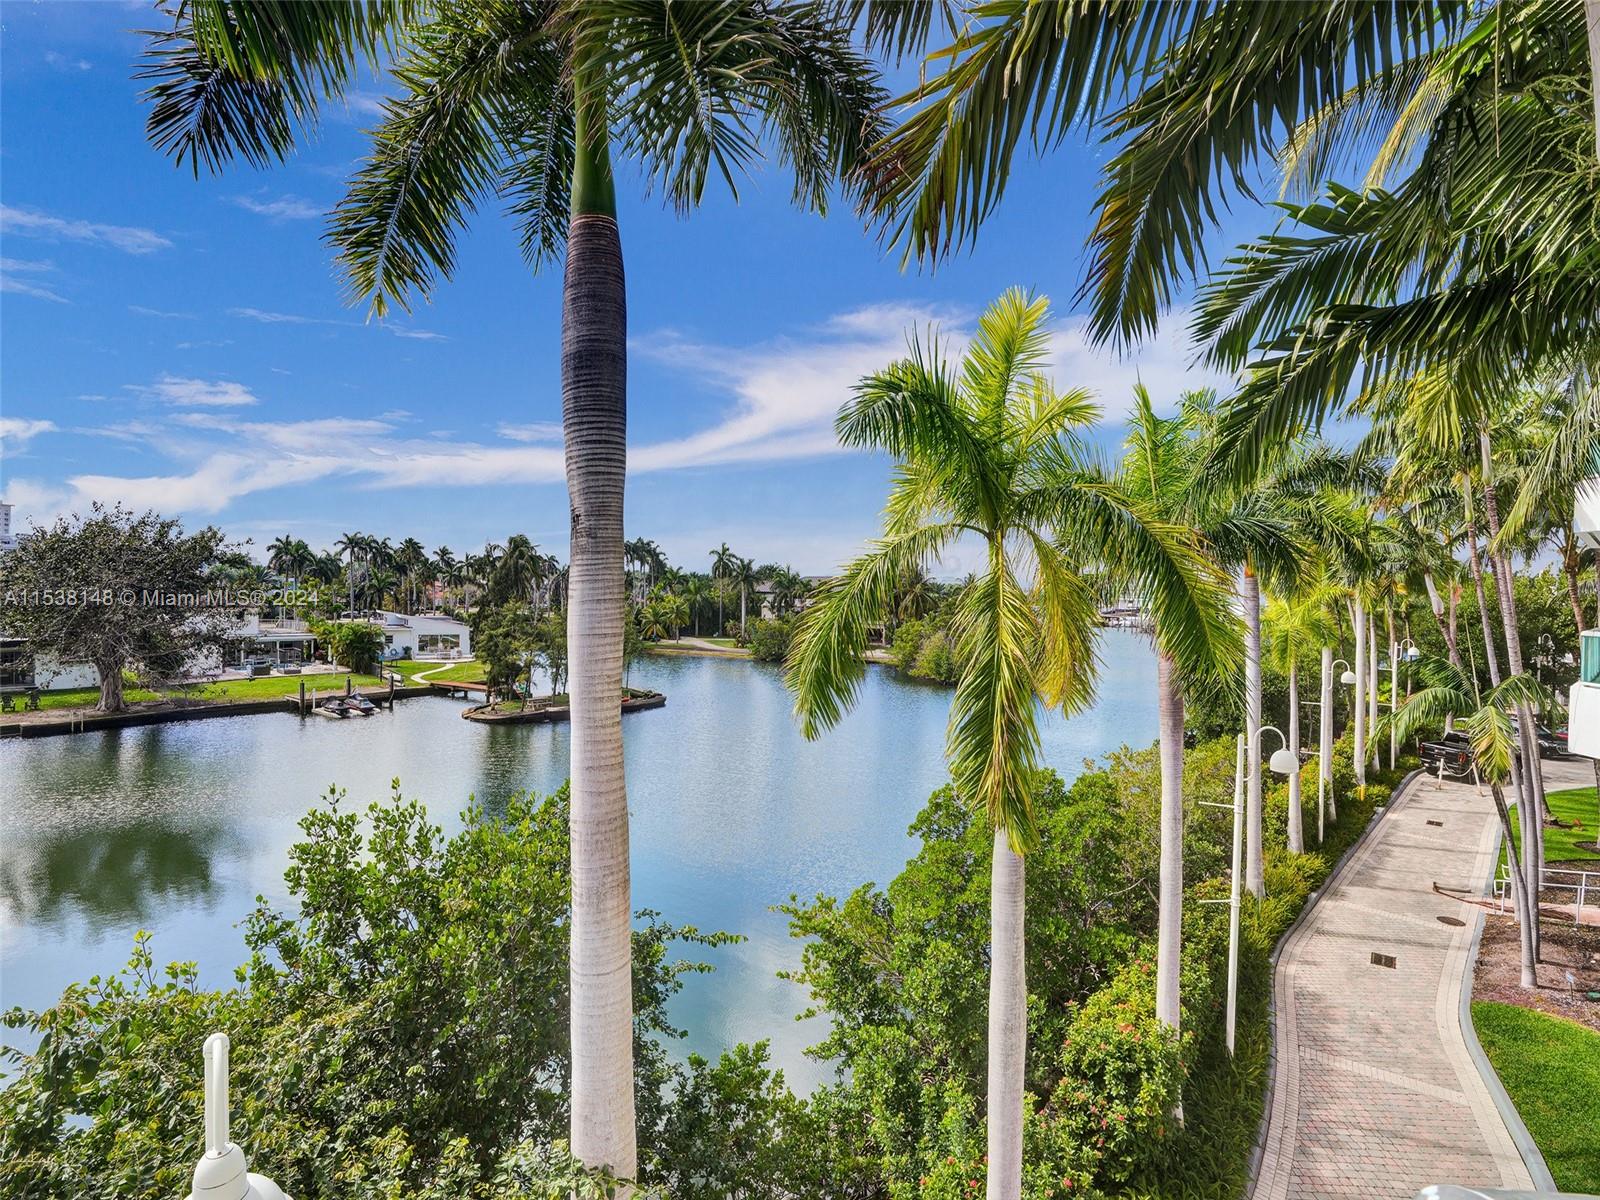 Live in your own waterfront tri-level home in paradise! This corner home boasts spectacular views from 4 terraces. 4 bedrooms plus den-hobby room/maid room, 4.5 bathrooms, and a private garage! 3 stories, large spacious and high ceilings, over 3,500 sqft. with top of the line amenities— beach club access, spa, gym, tennis courts and even boat dock availability! A true gem of a property. The perfect mix of a home and a condo, privacy without the maintenance; yet with all the amazing amenities of a luxurious building.